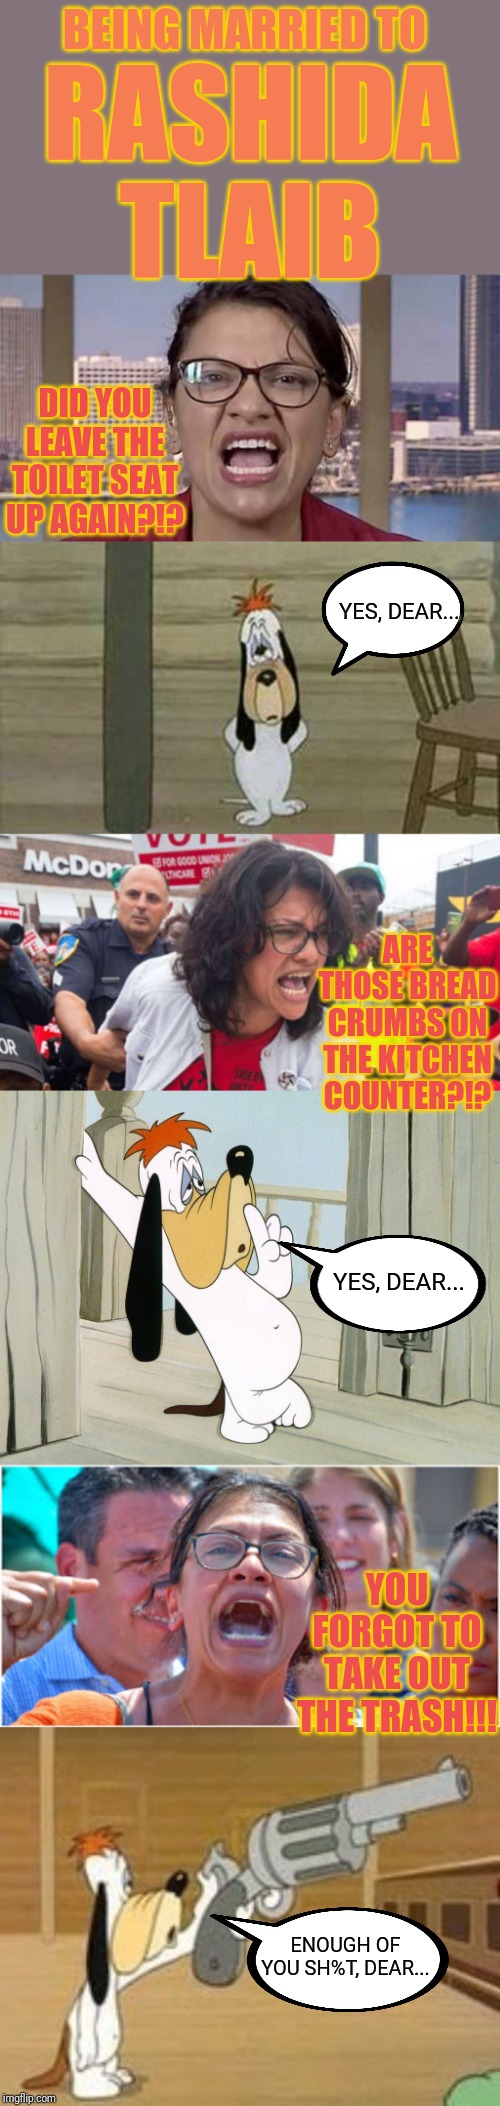 The worst hell imaginable... | BEING MARRIED TO; RASHIDA TLAIB; DID YOU LEAVE THE TOILET SEAT UP AGAIN?!? YES, DEAR... ARE THOSE BREAD CRUMBS ON THE KITCHEN COUNTER?!? YES, DEAR... YOU FORGOT TO TAKE OUT THE TRASH!!! ENOUGH OF YOU SH%T, DEAR... | image tagged in rashida tlaib,marriage,hell,the squad,battered husband,droopy dog | made w/ Imgflip meme maker